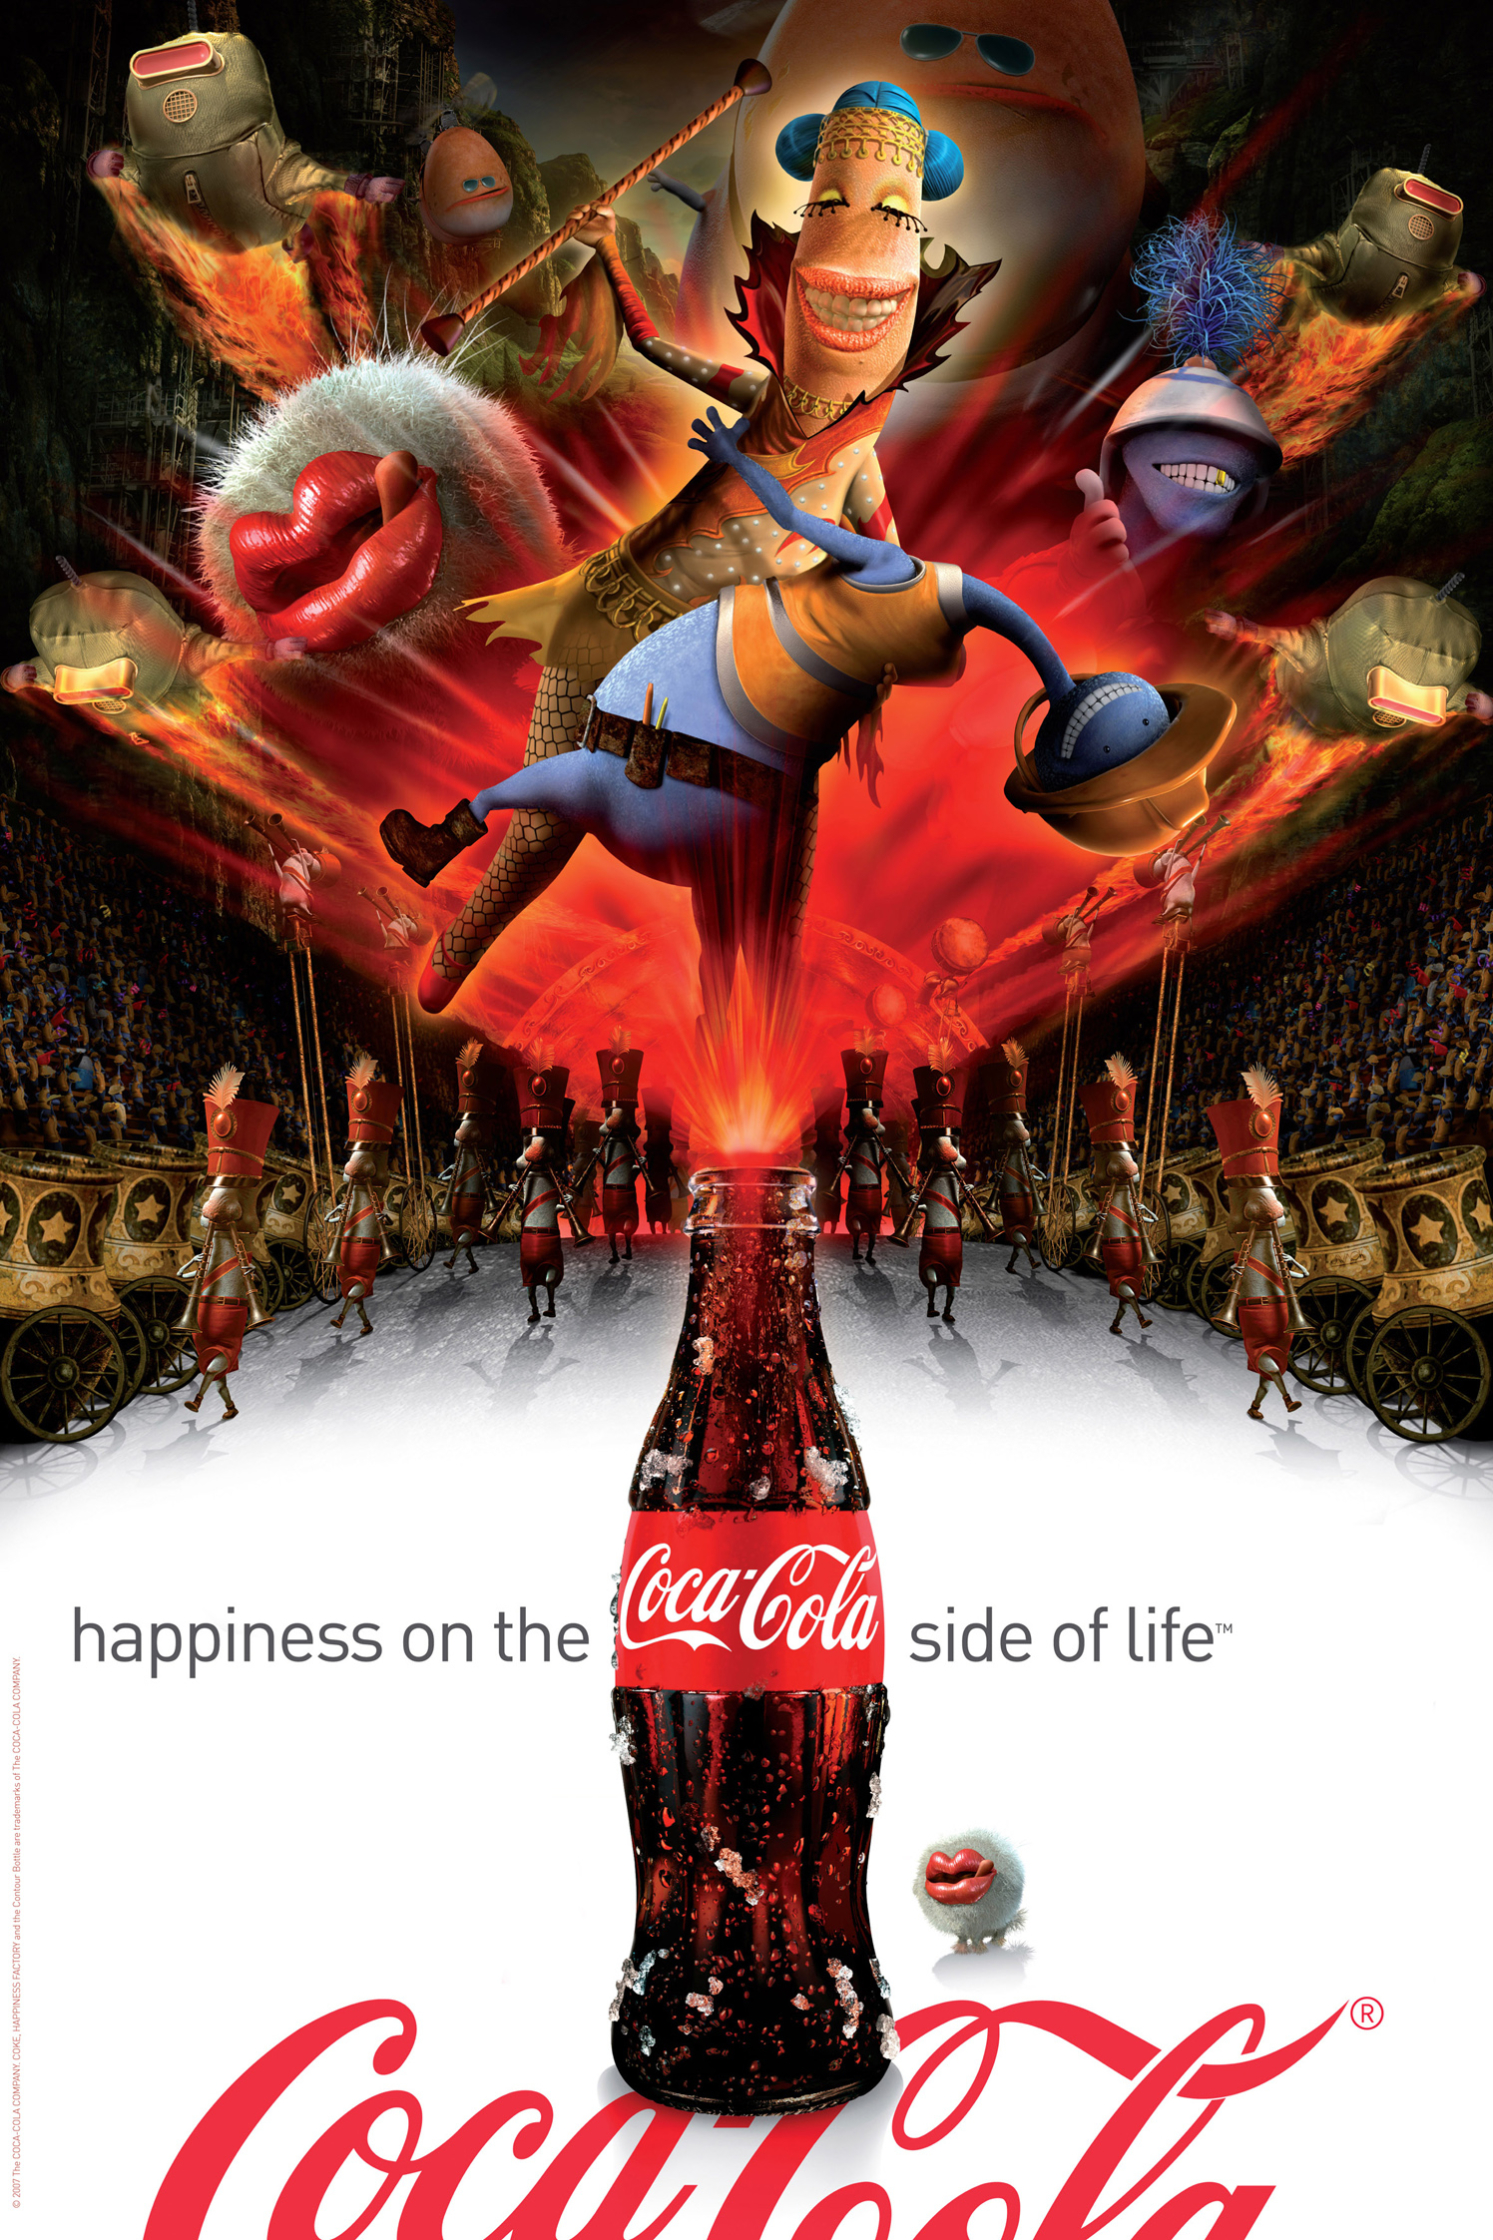 coca cola happiness factory the movie characters